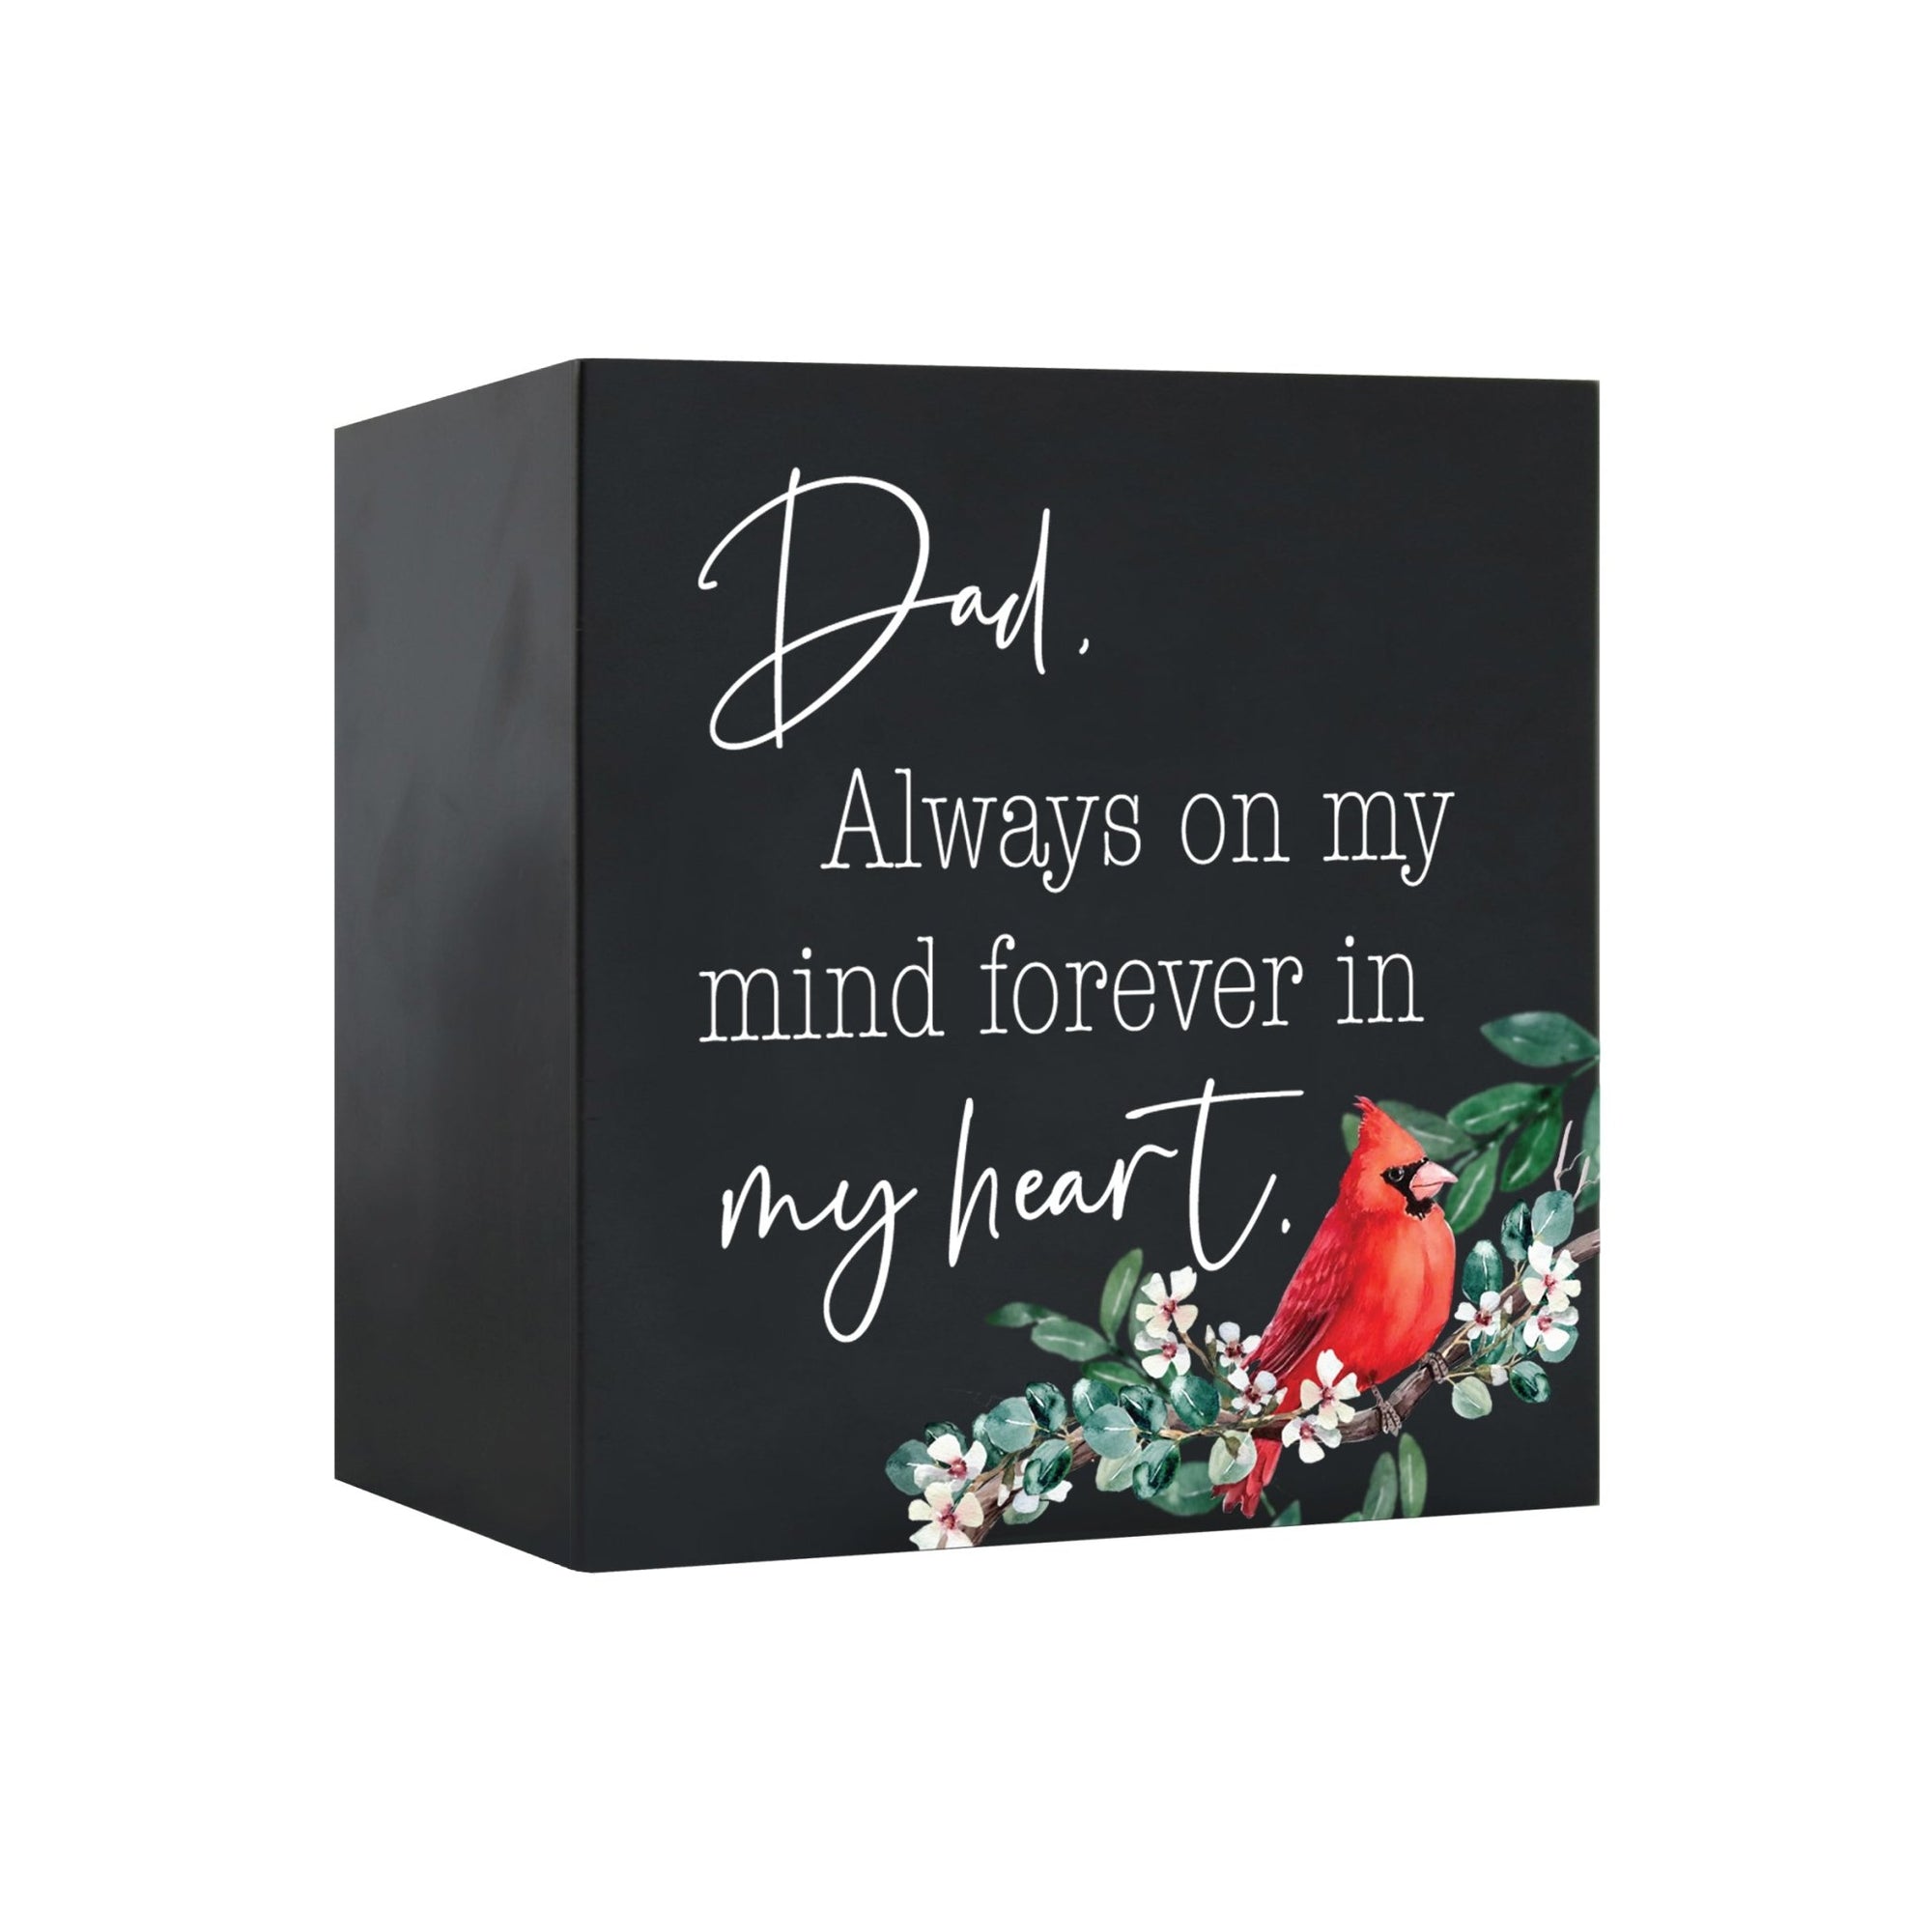 A wooden cremation urn box with a decorative design, suitable for holding human ashes. Dad Urn